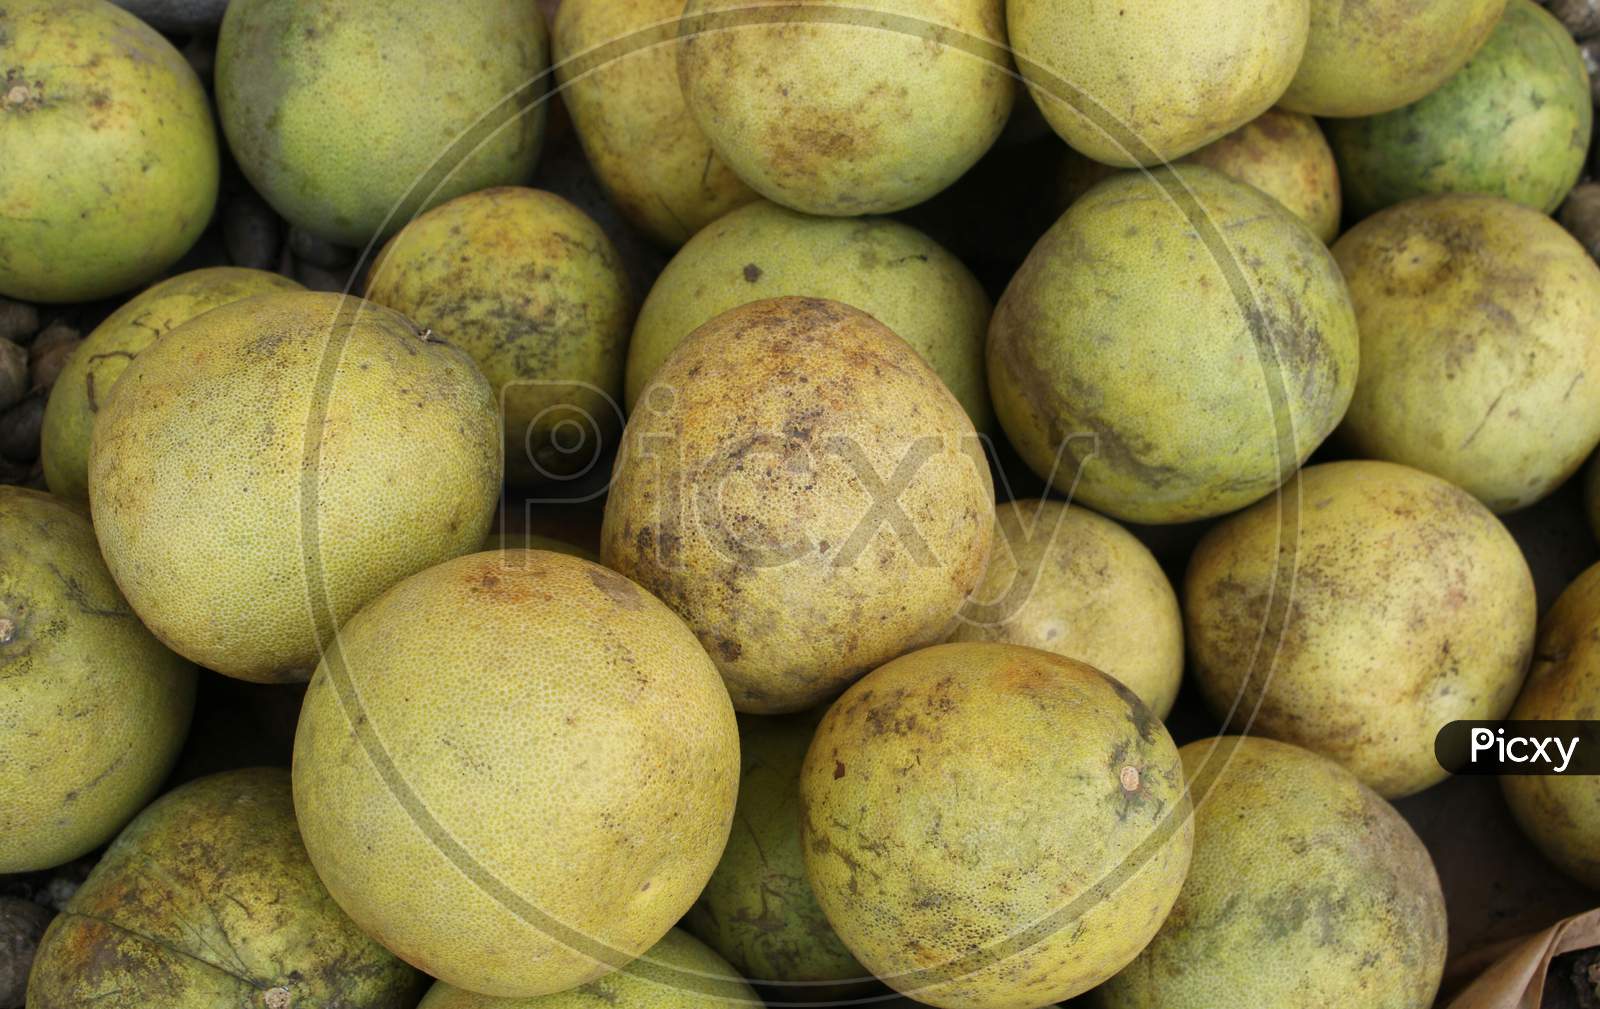 Pyrus, Many Fresh Pears In The Shop With Pears Background.